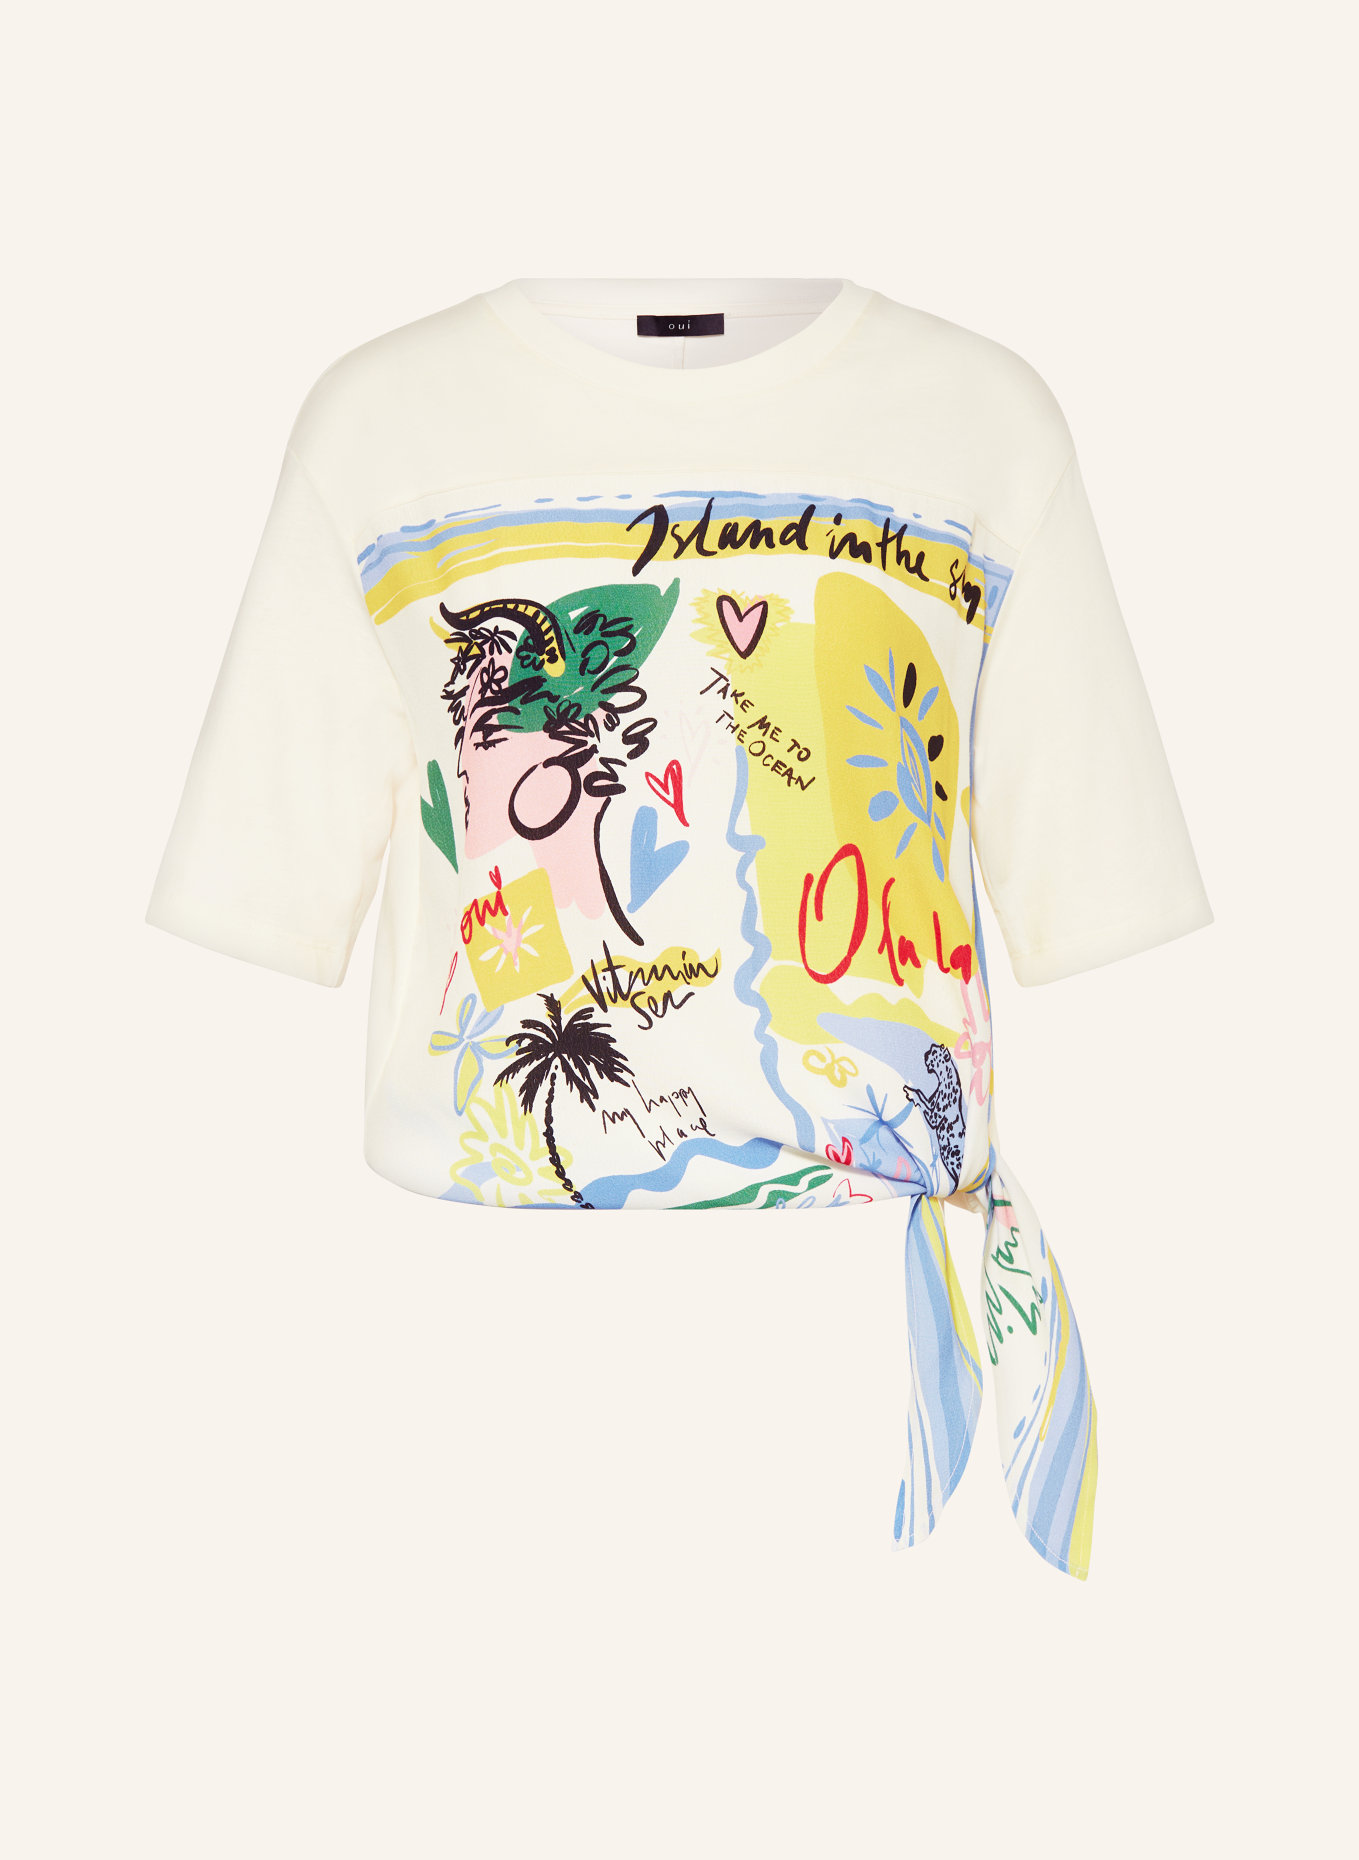 oui T-shirt in mixed materials, Color: CREAM/ YELLOW/ BLUE (Image 1)